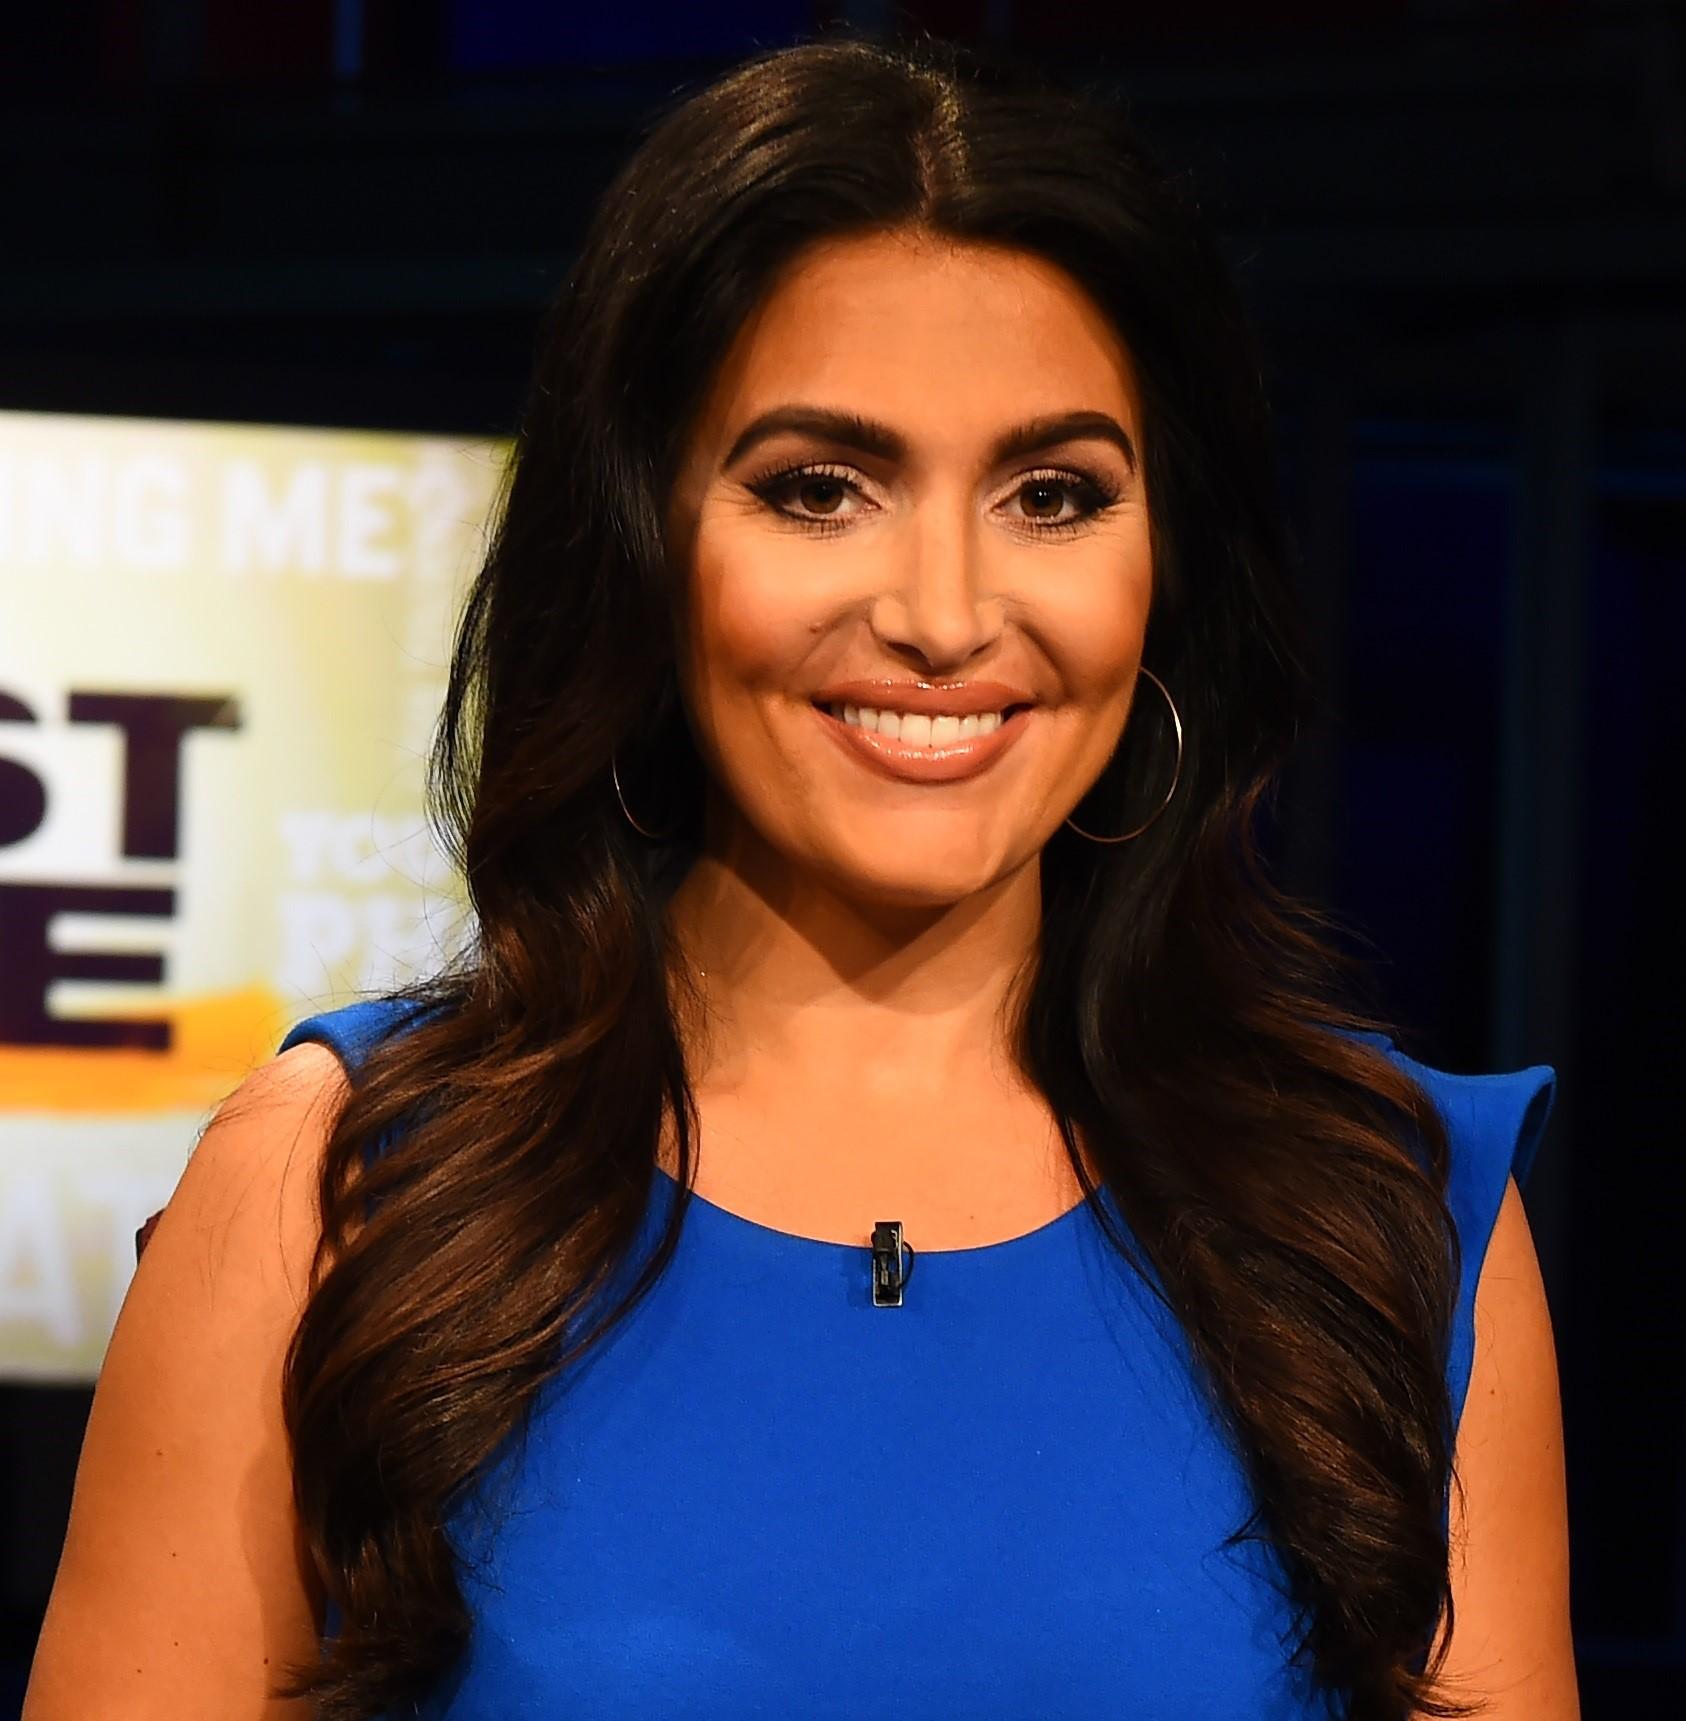 70+ Hot Pictures Of Molly Qerim Are So Damn Sexy That We Don’t Deserve Her 411